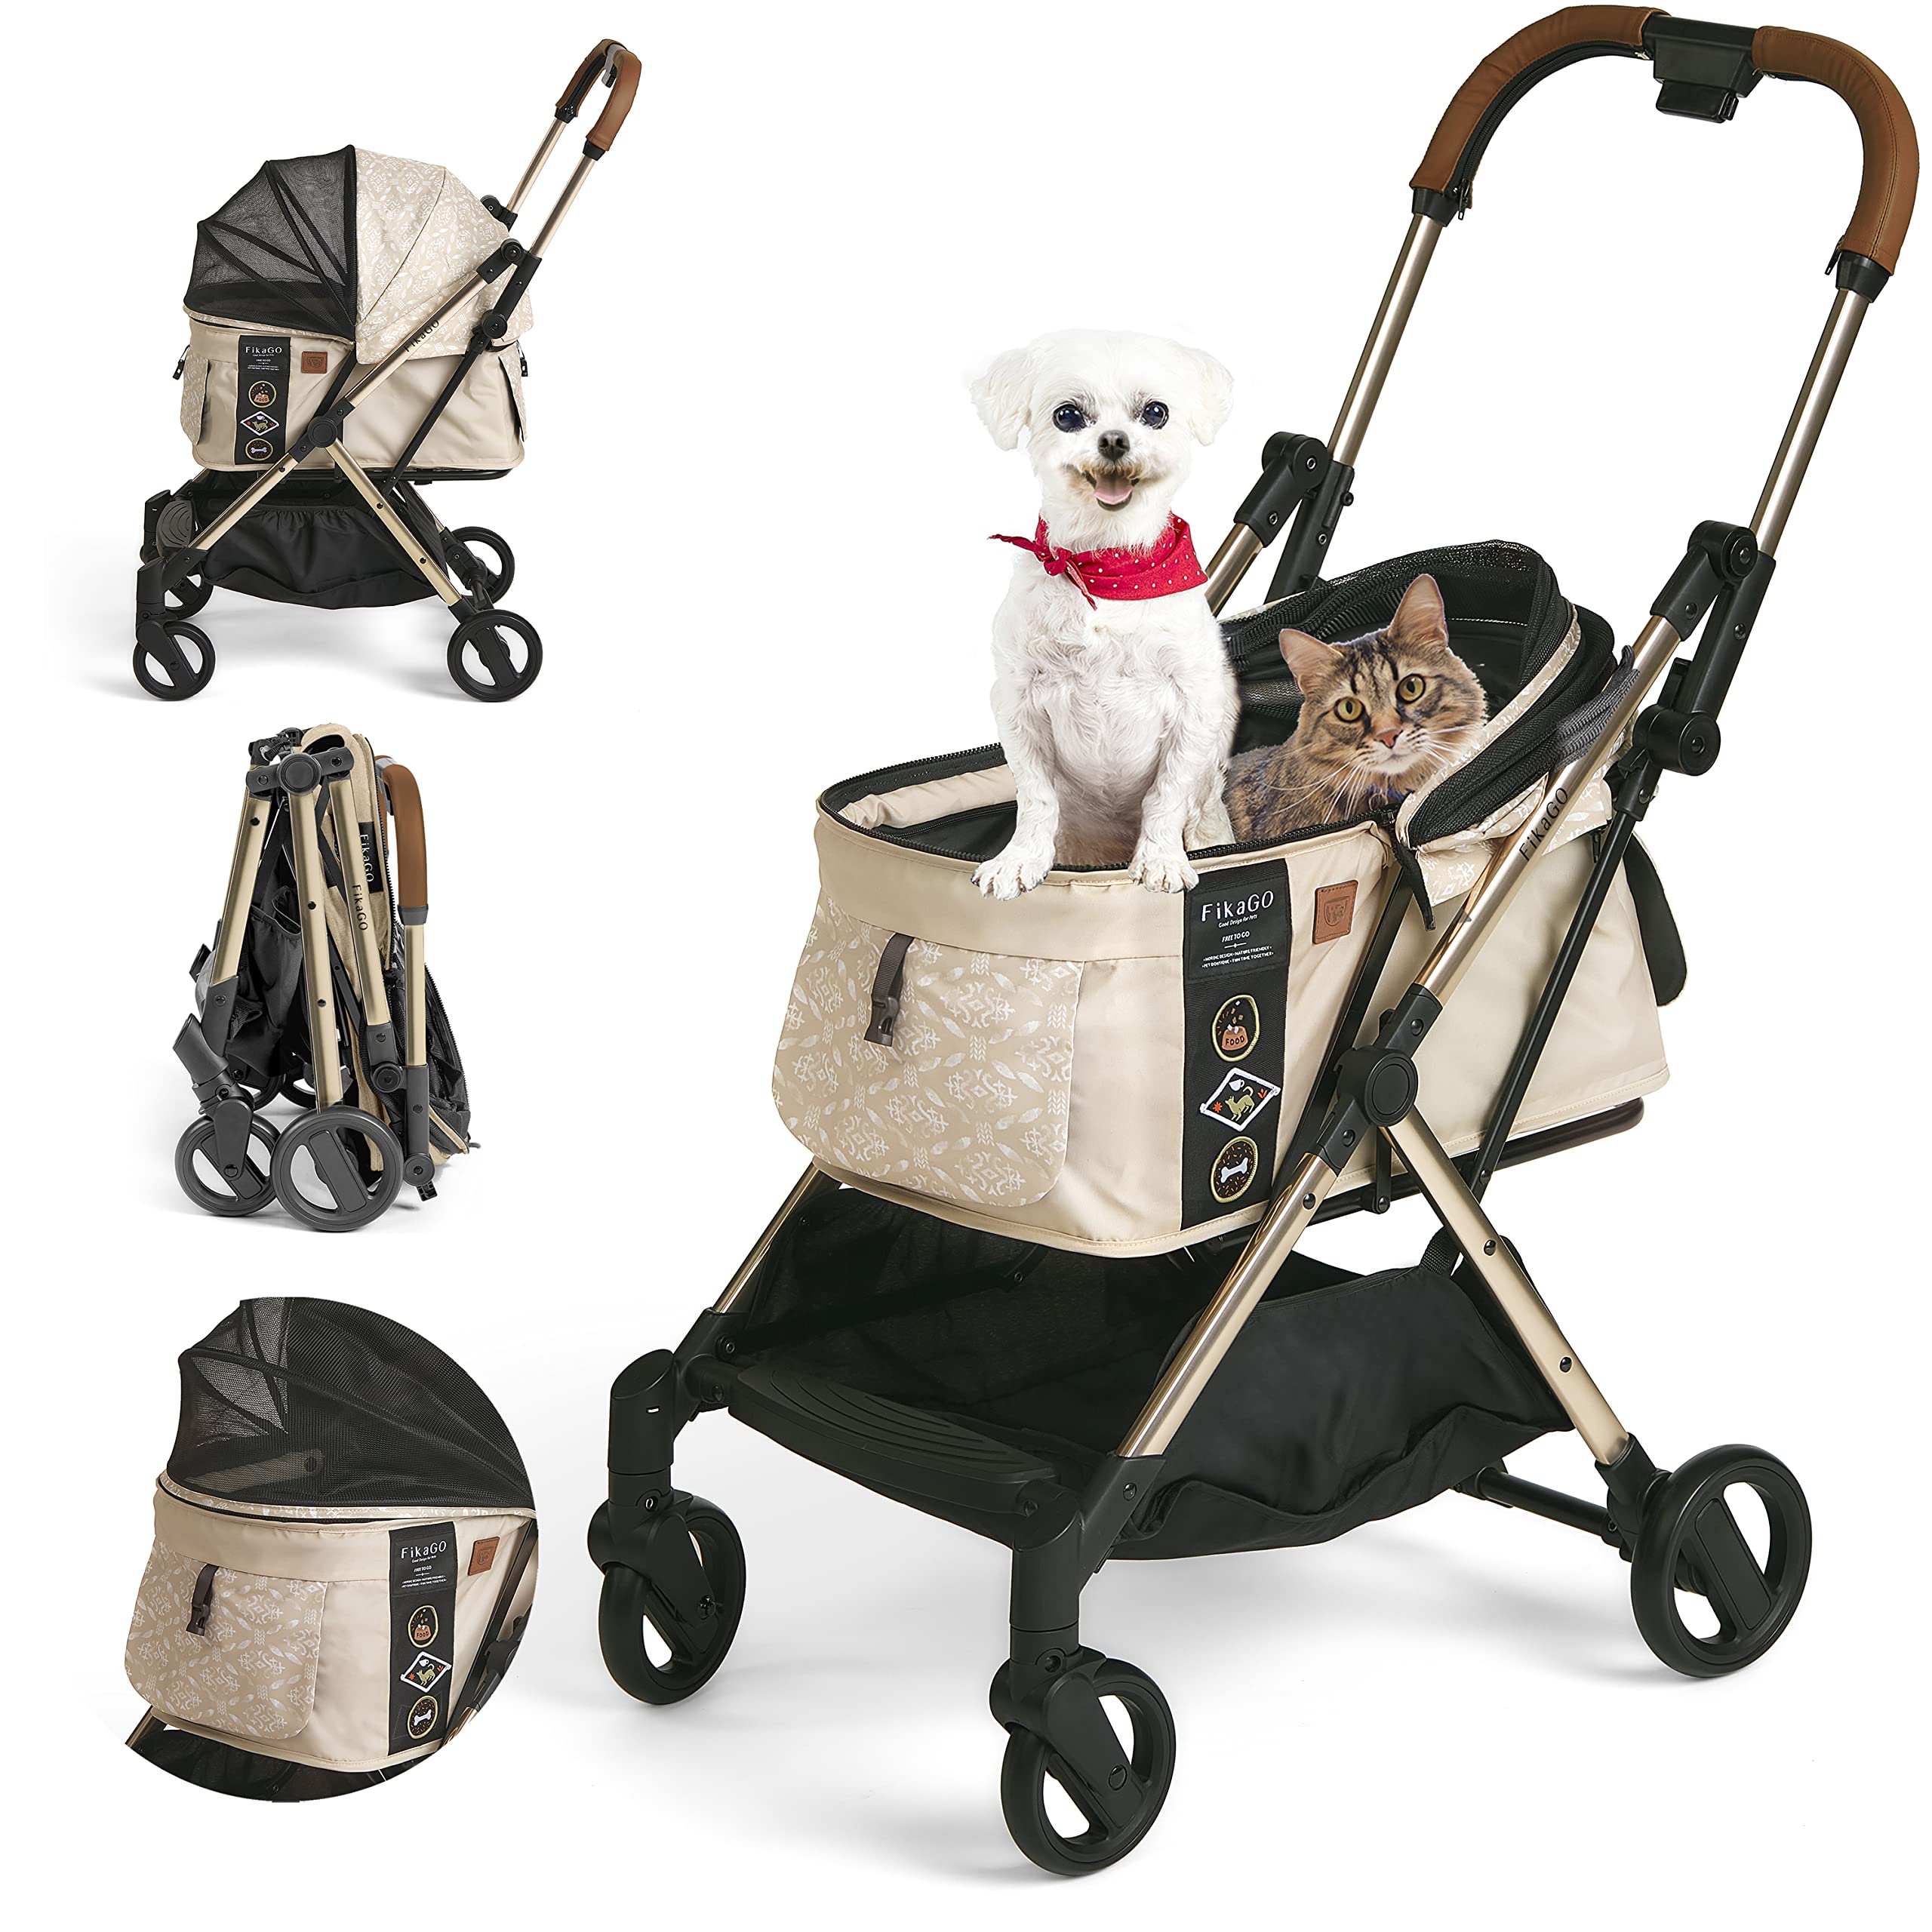 Fikago Pet Stroller Lightweight Fast Folding- 44lbs Load capacity Dog Stroller carriage for Small Medium Sized Dogs Pet gear Str